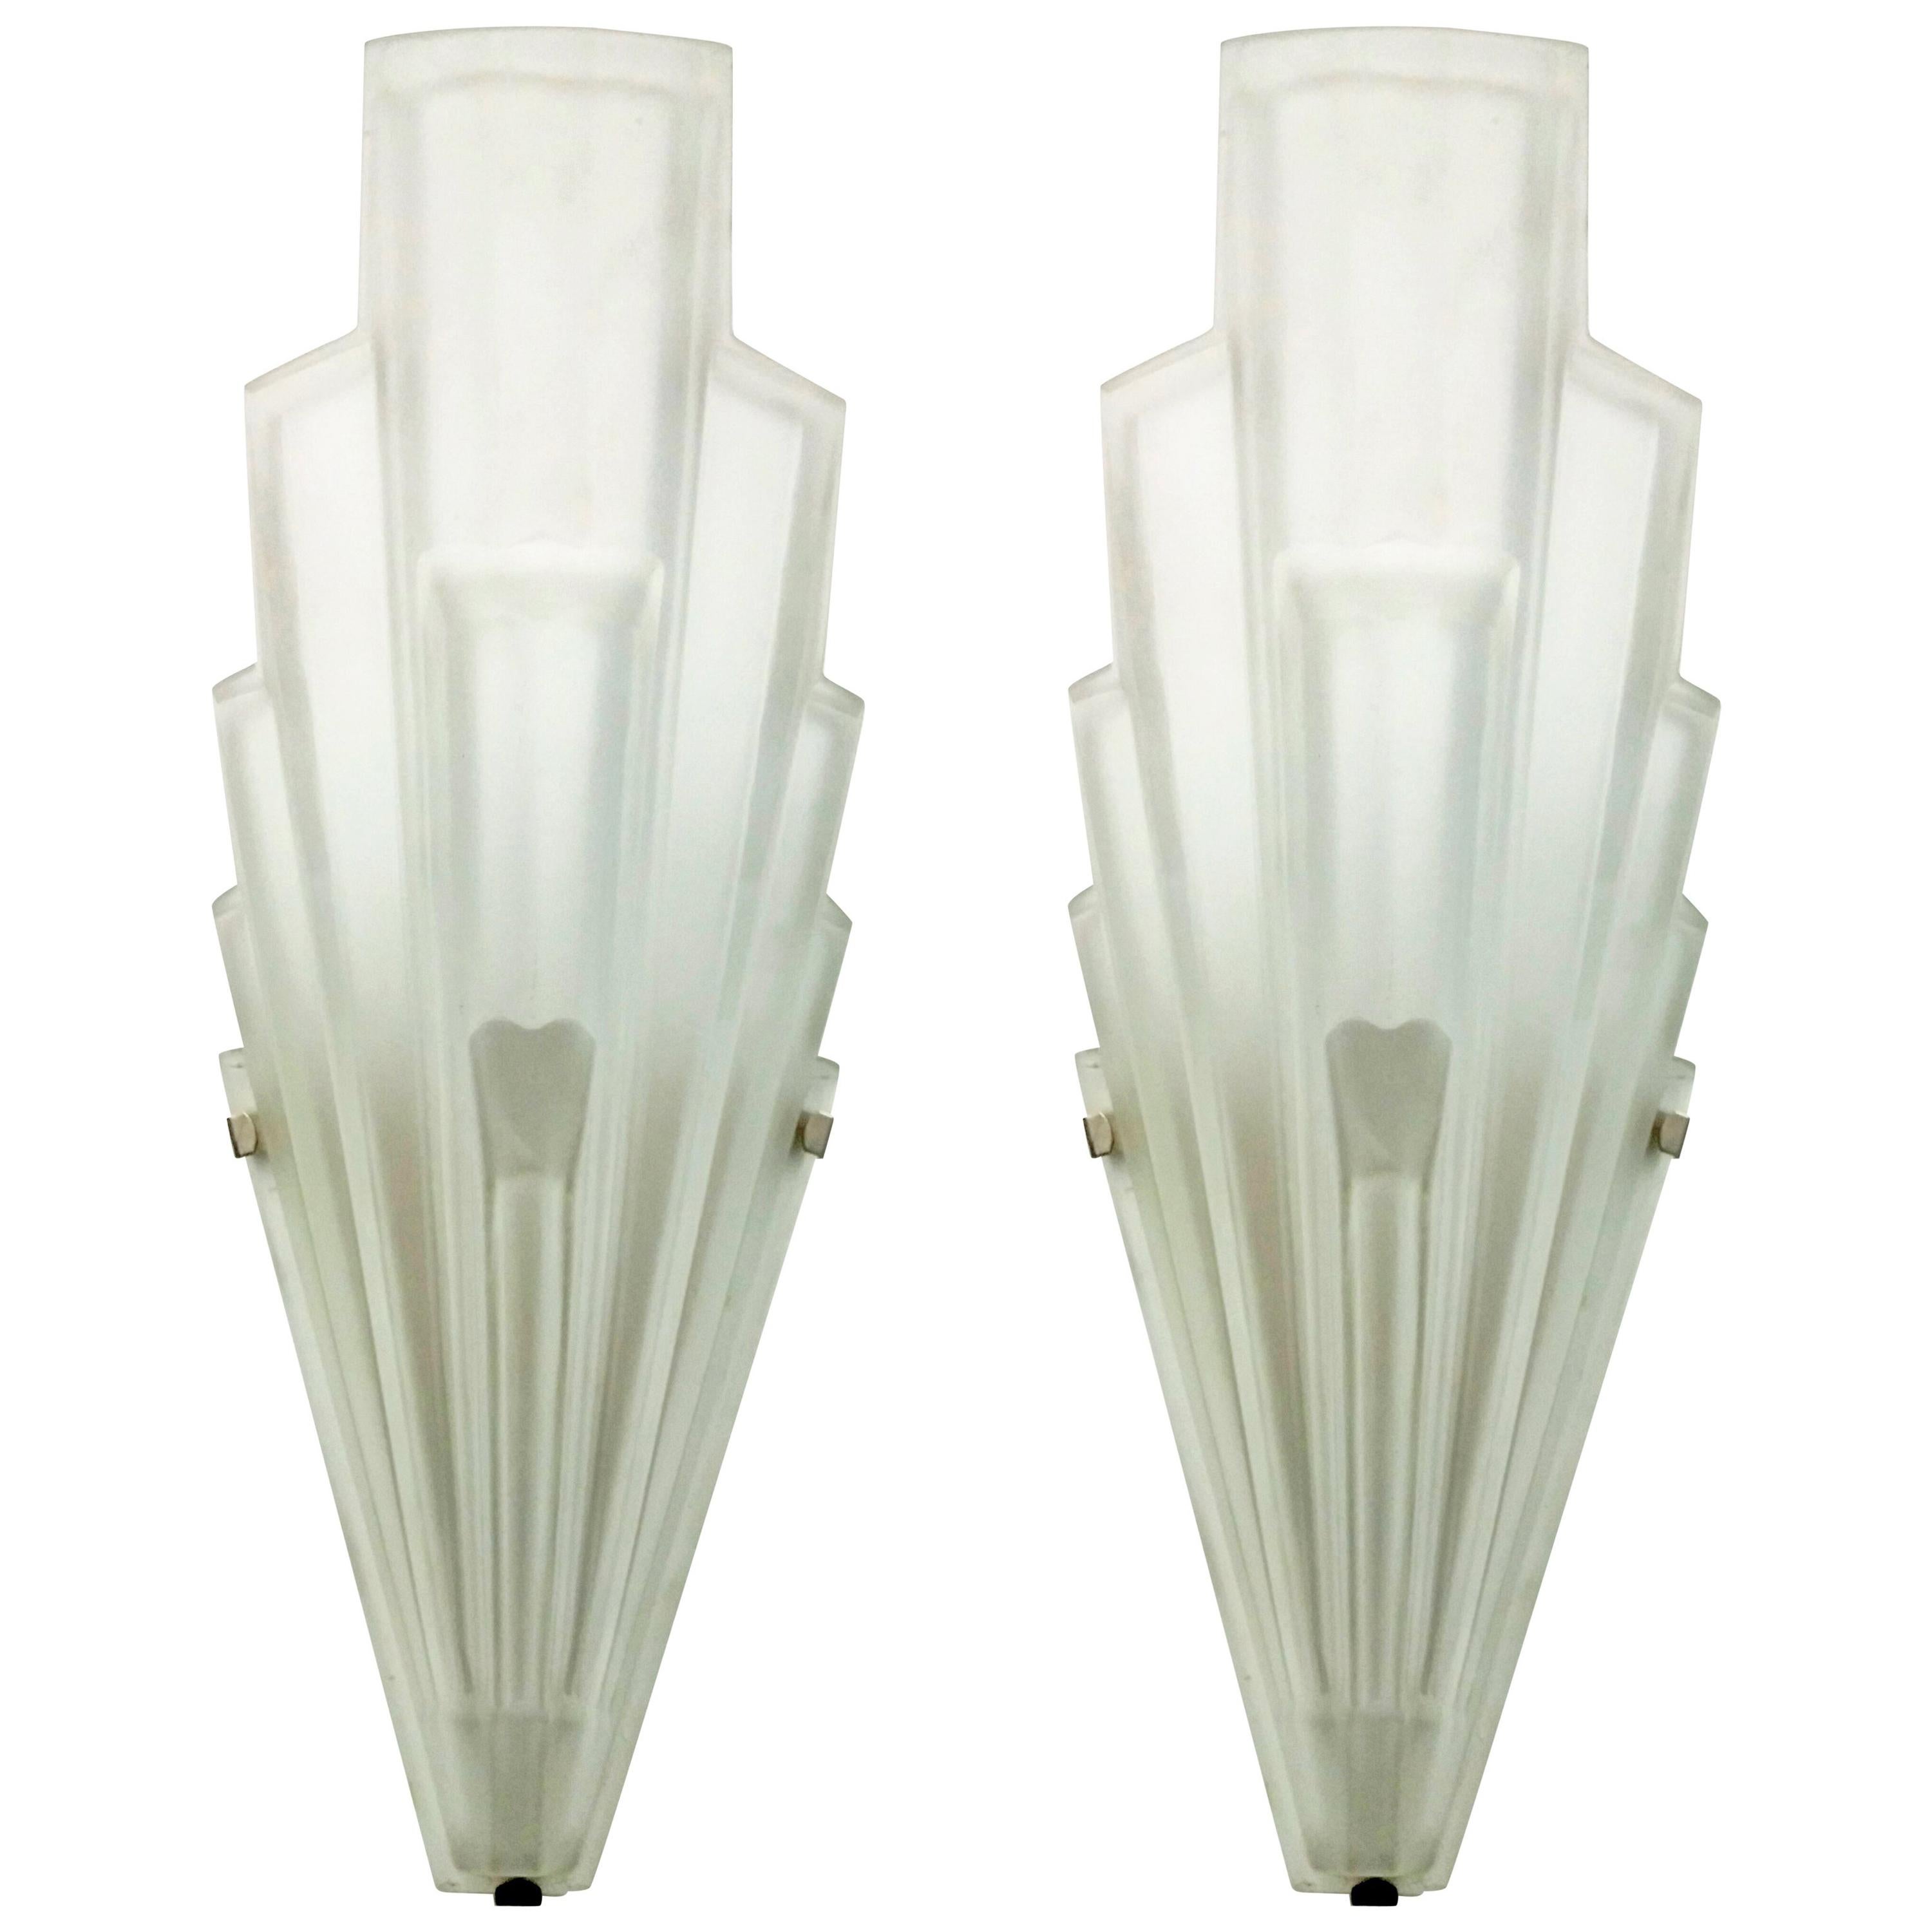 Pair of French Art Deco Wall Sconces by Ernest Sabino (large version)